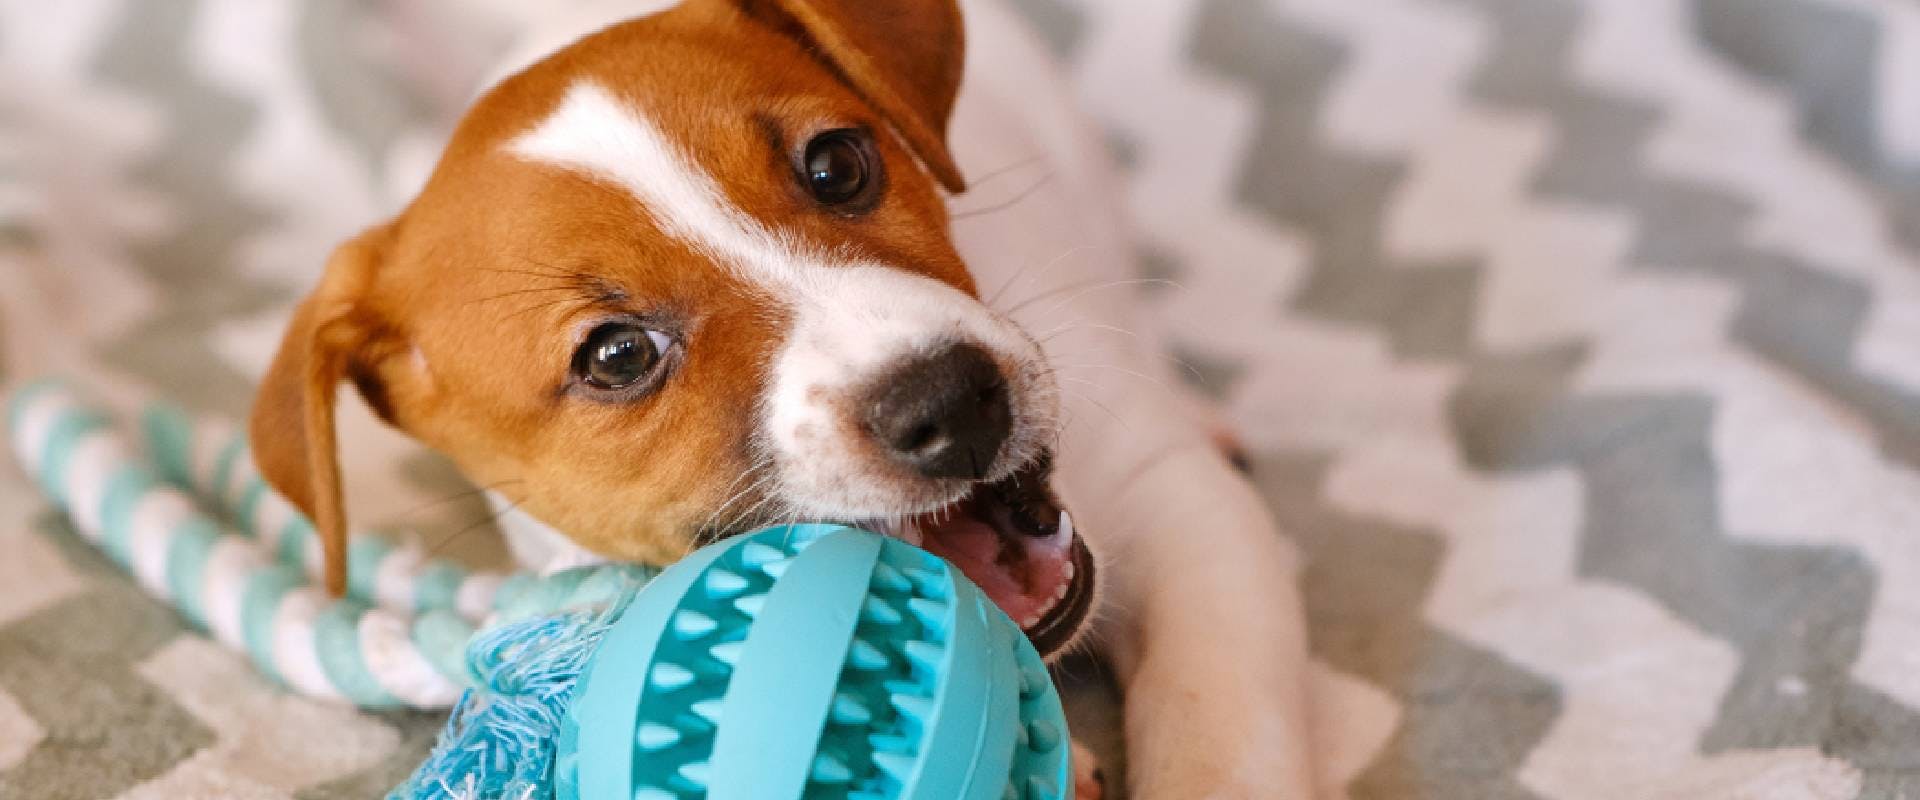 Jack Russell Terrier puppy playing with toy